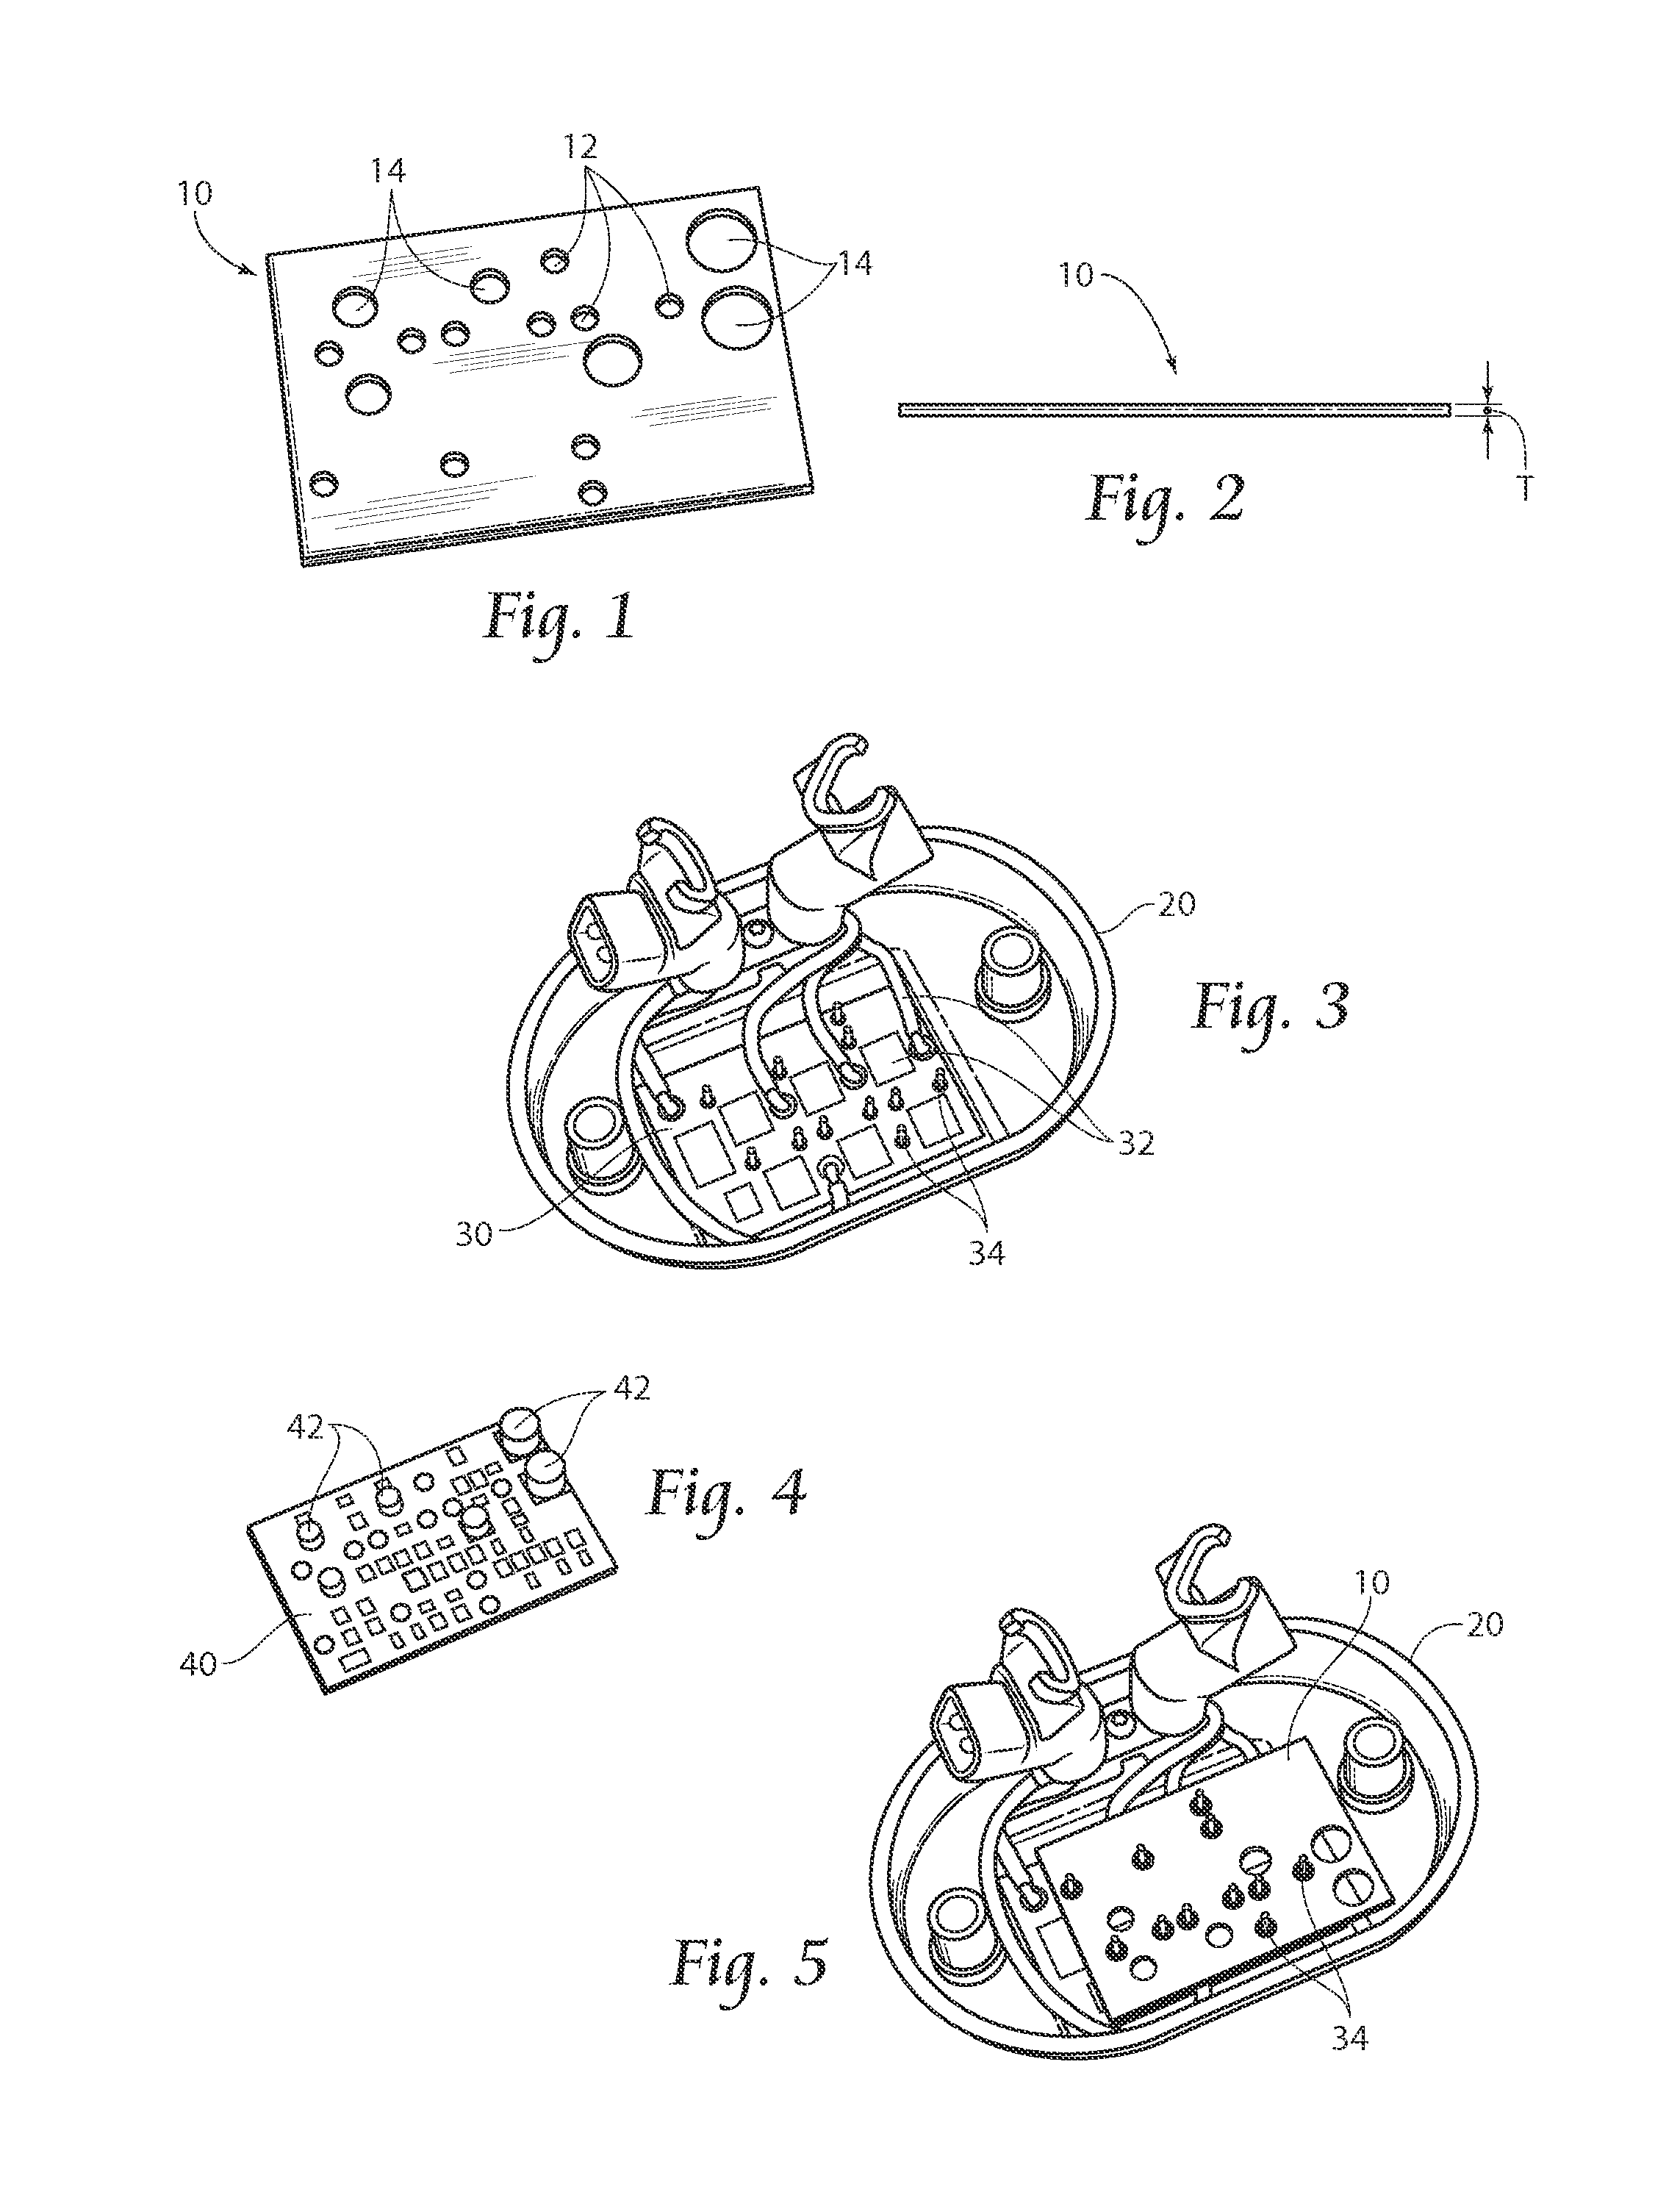 Stacked circuit board assembly with compliant middle member